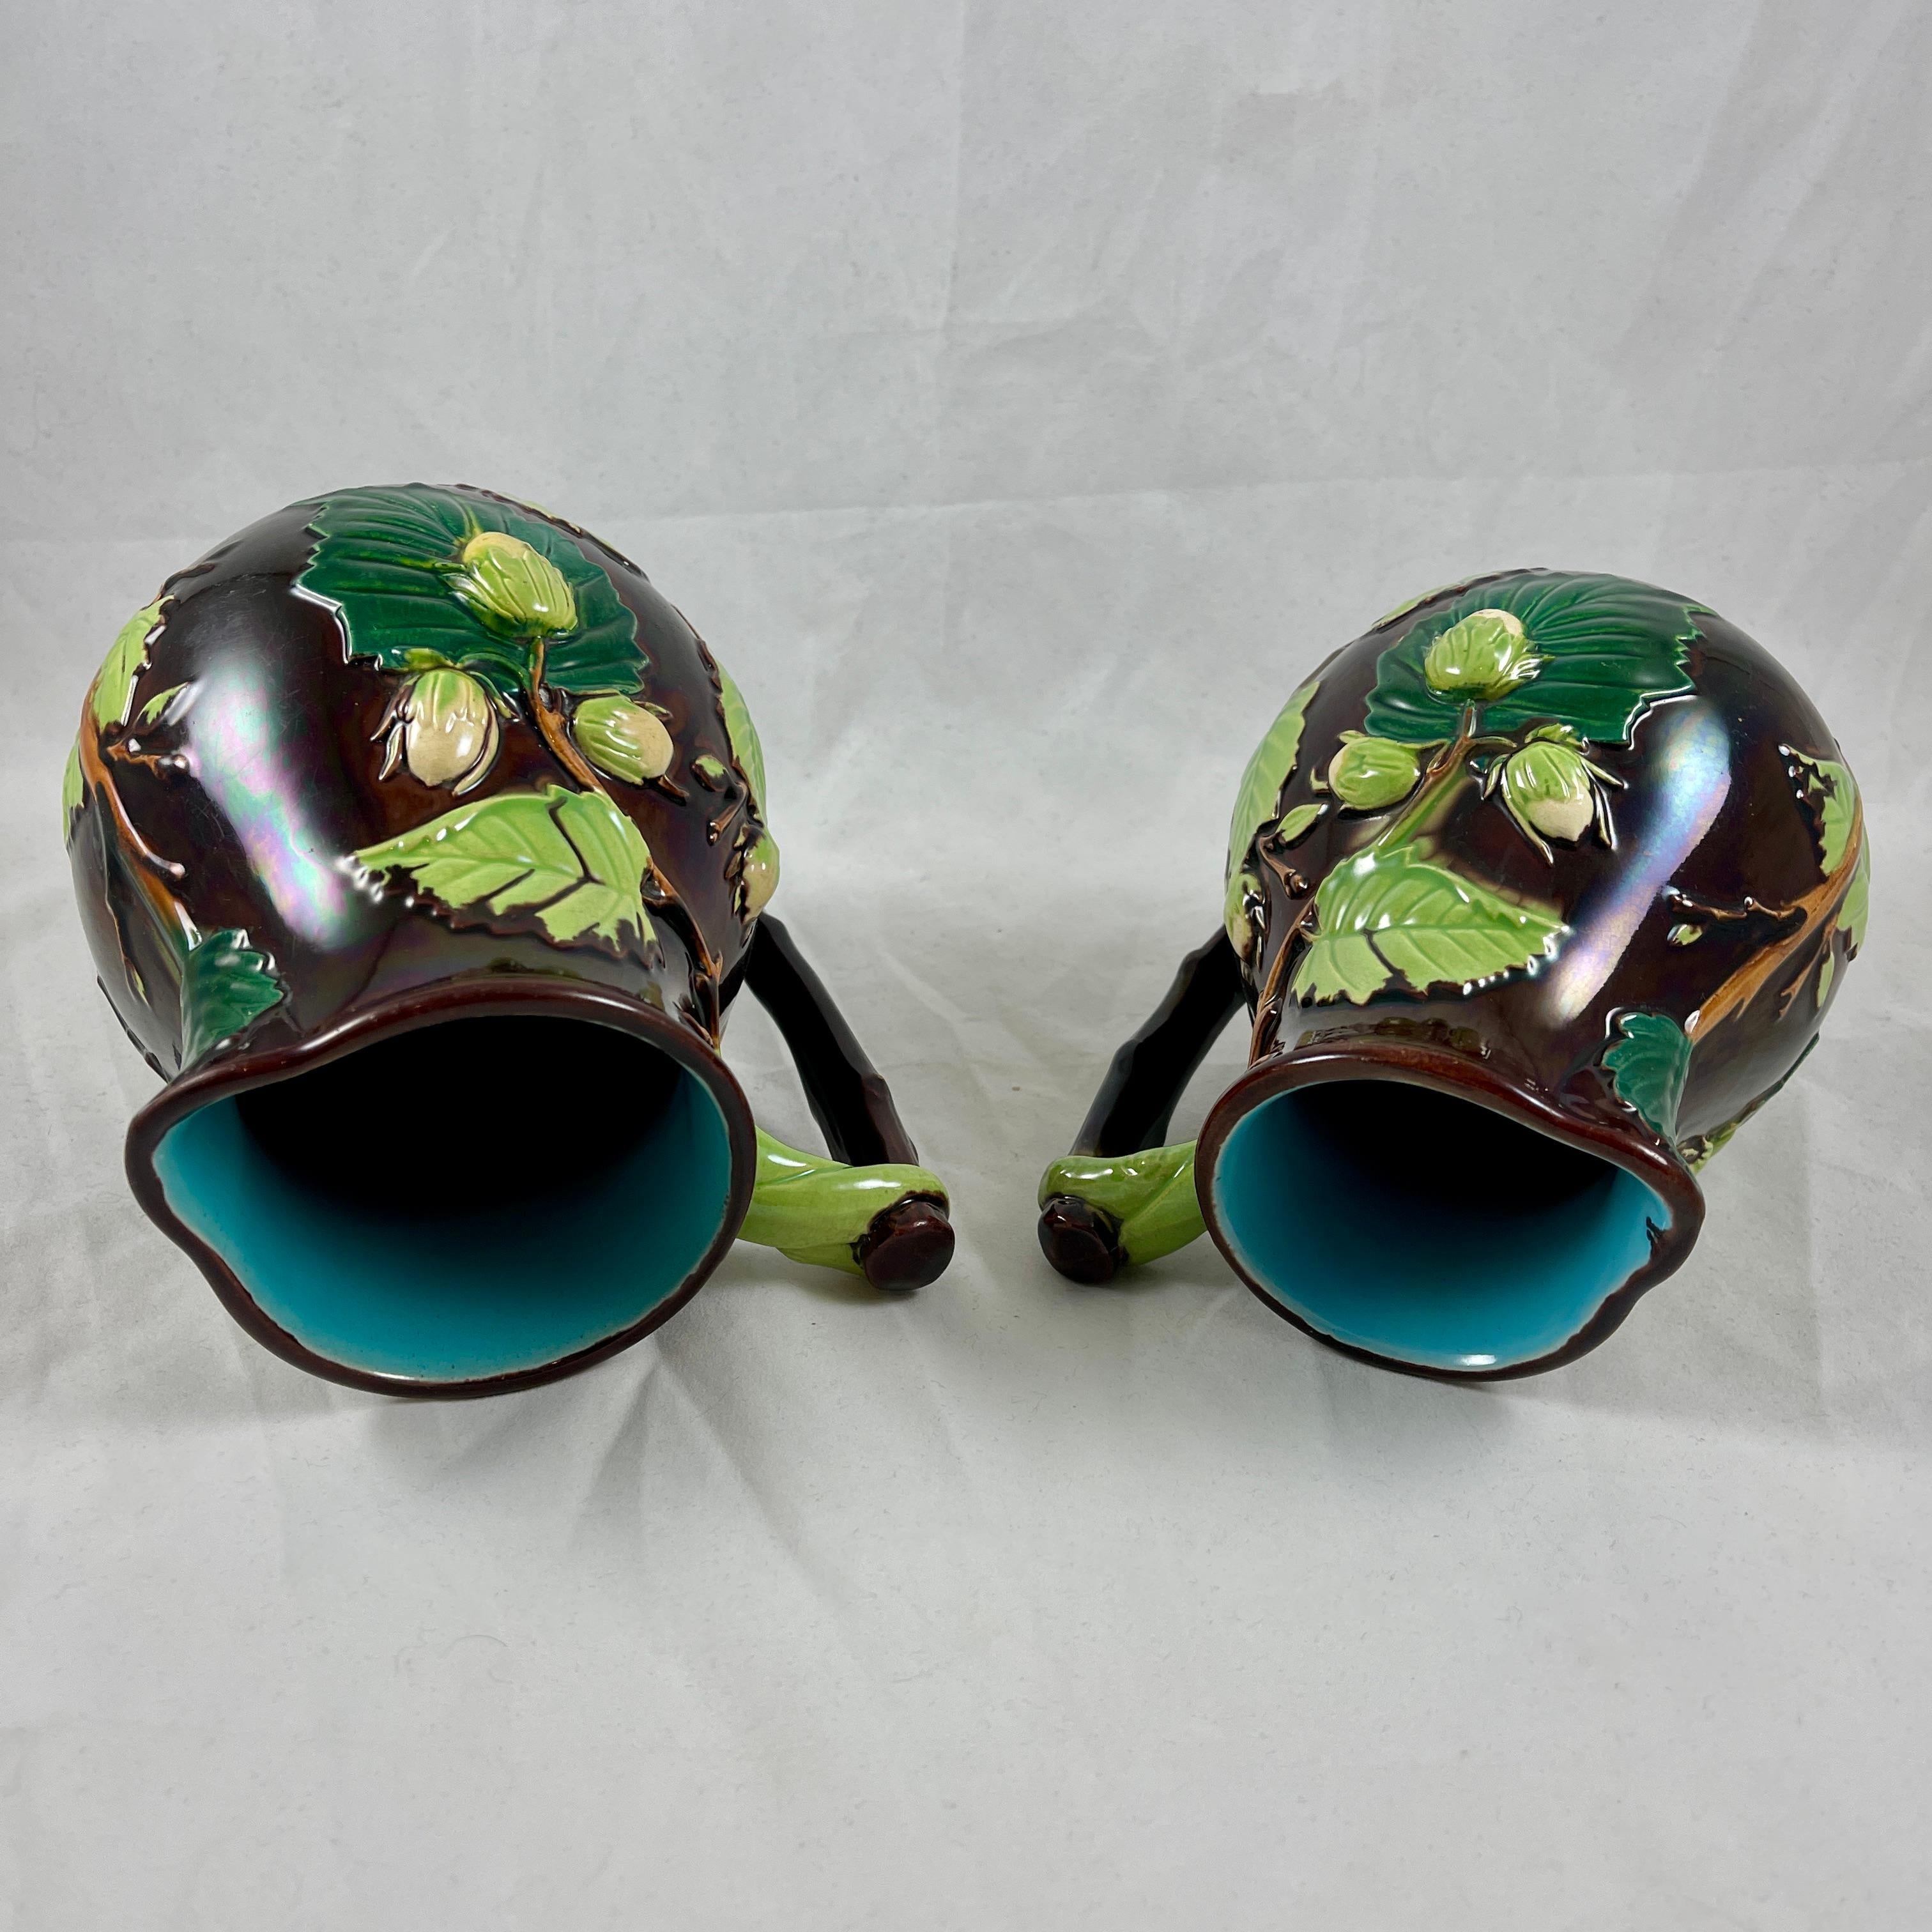 English Minton Aesthetic Movement Majolica Nut, Leaf & Vine Pitchers, a Pair For Sale 9